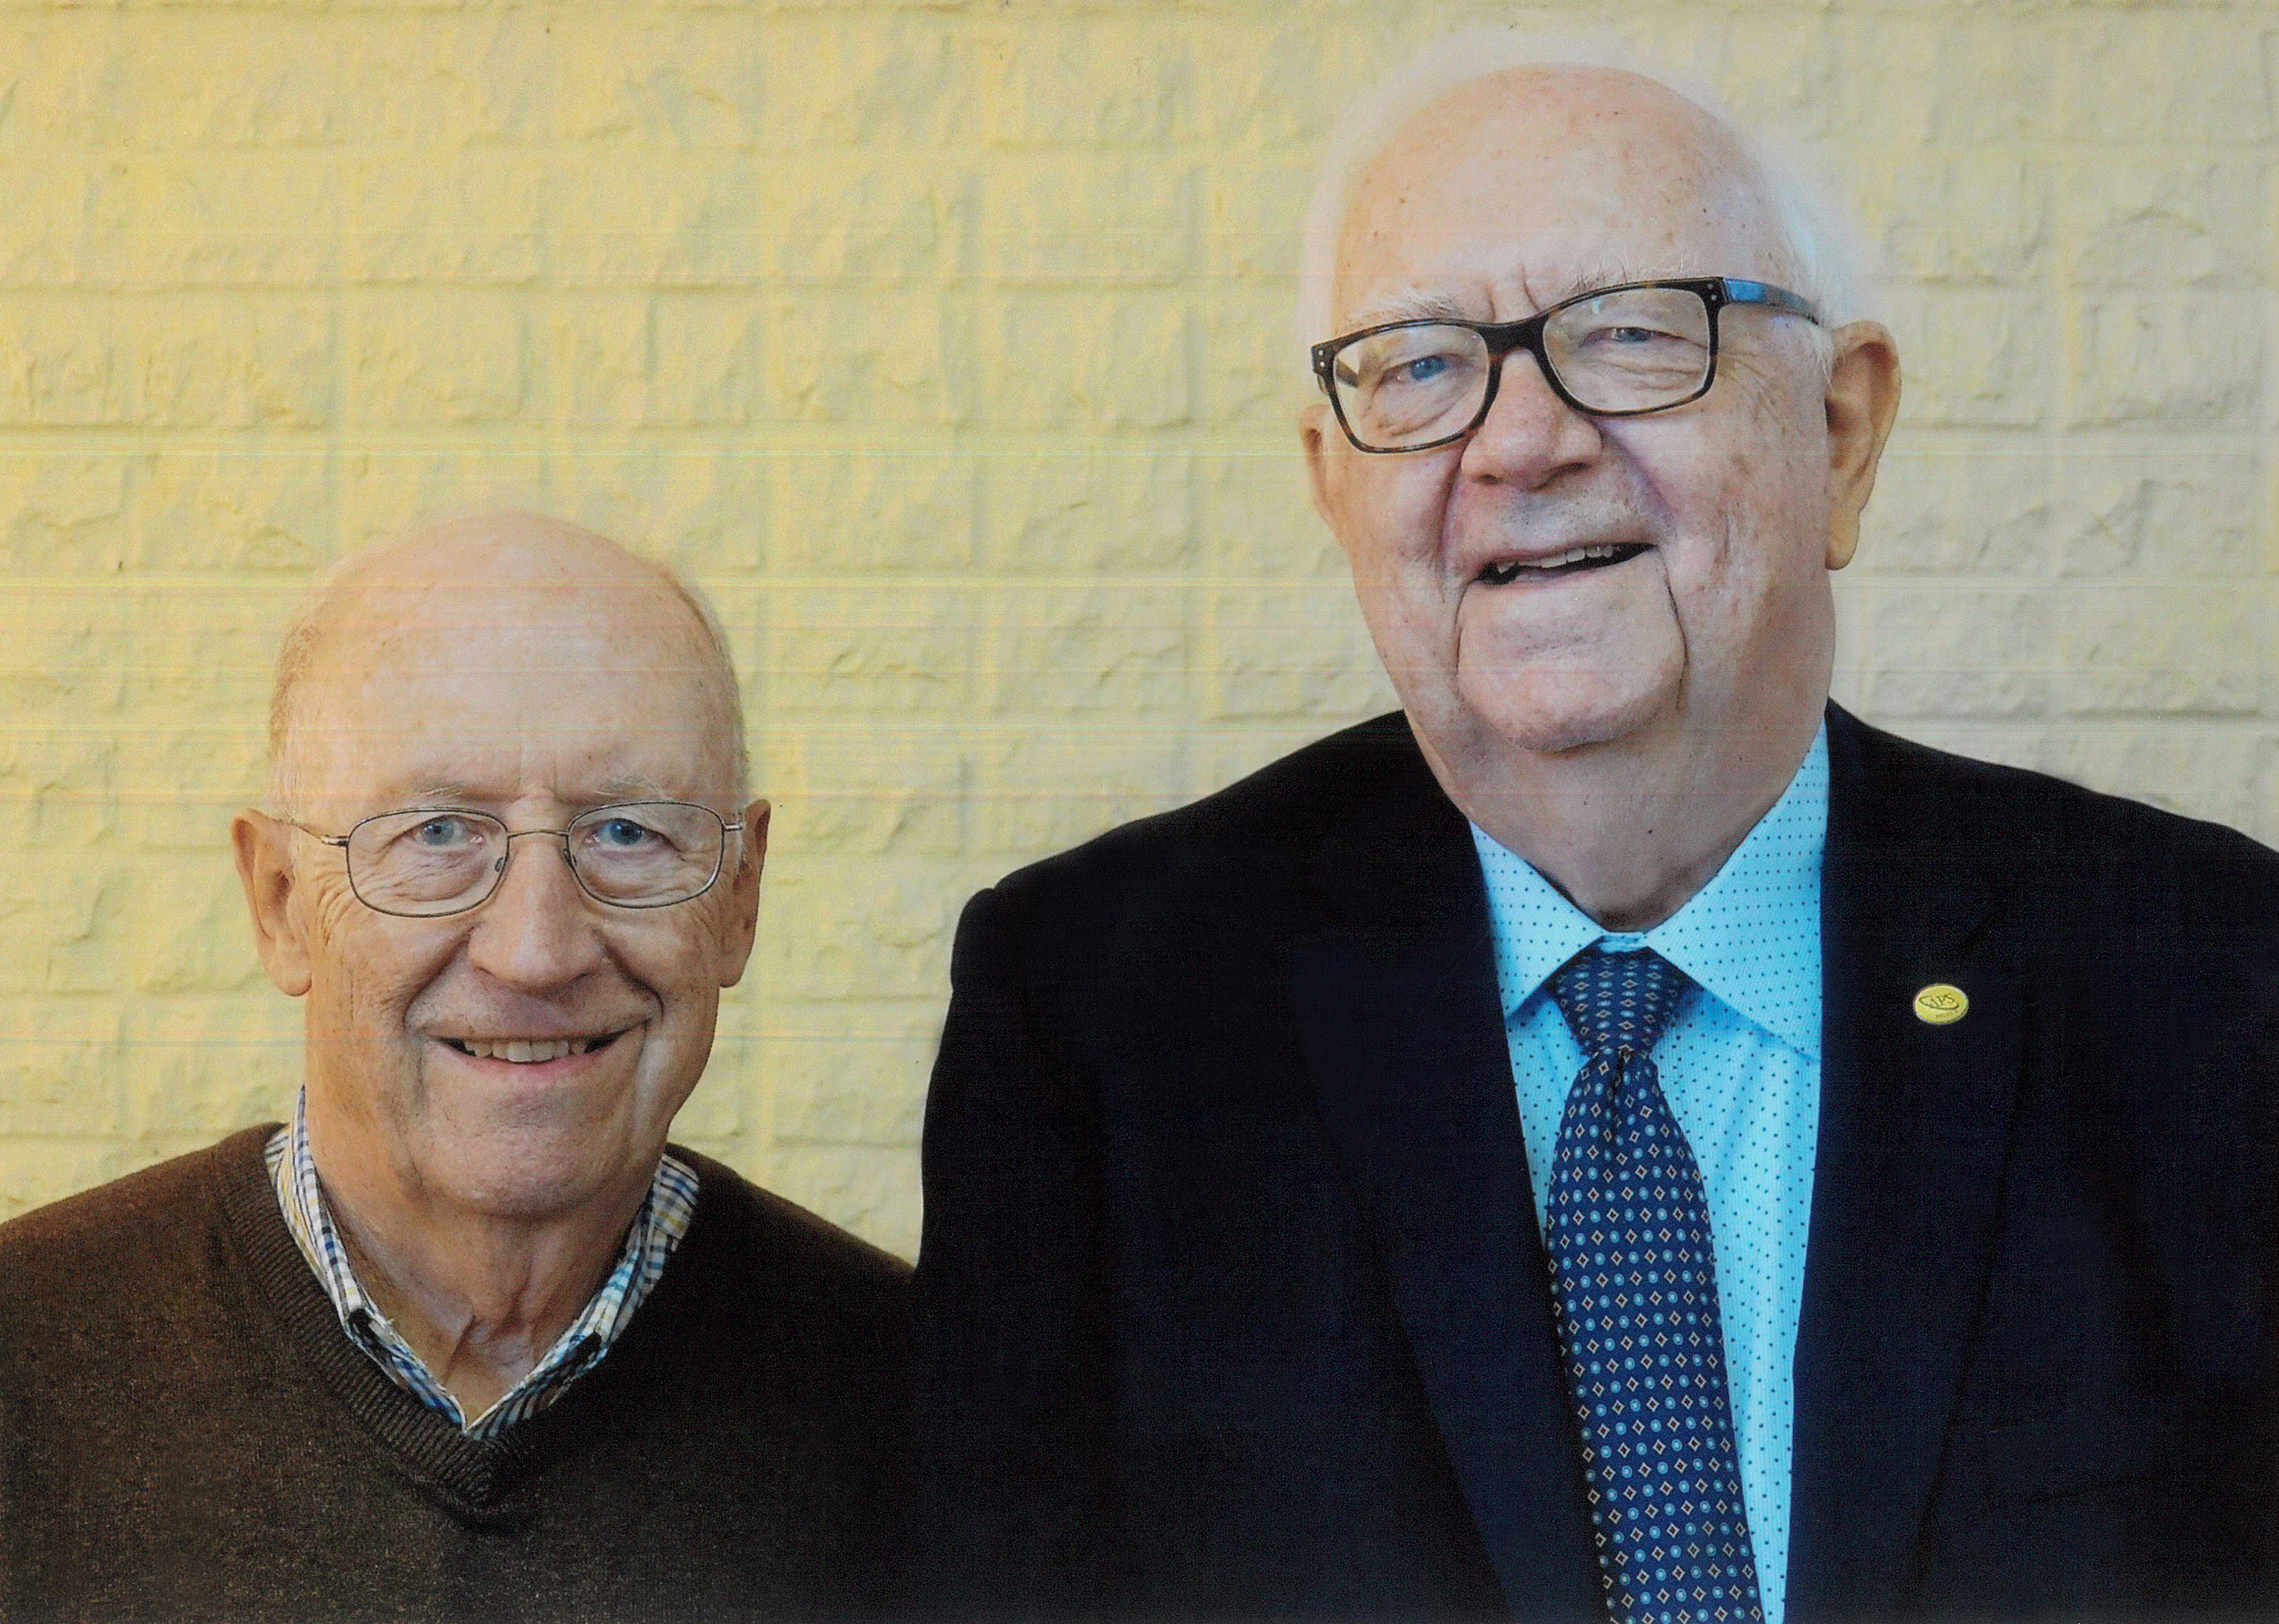 Longtime friends and colleagues John Woollam (left) and David J. Sellmyer.